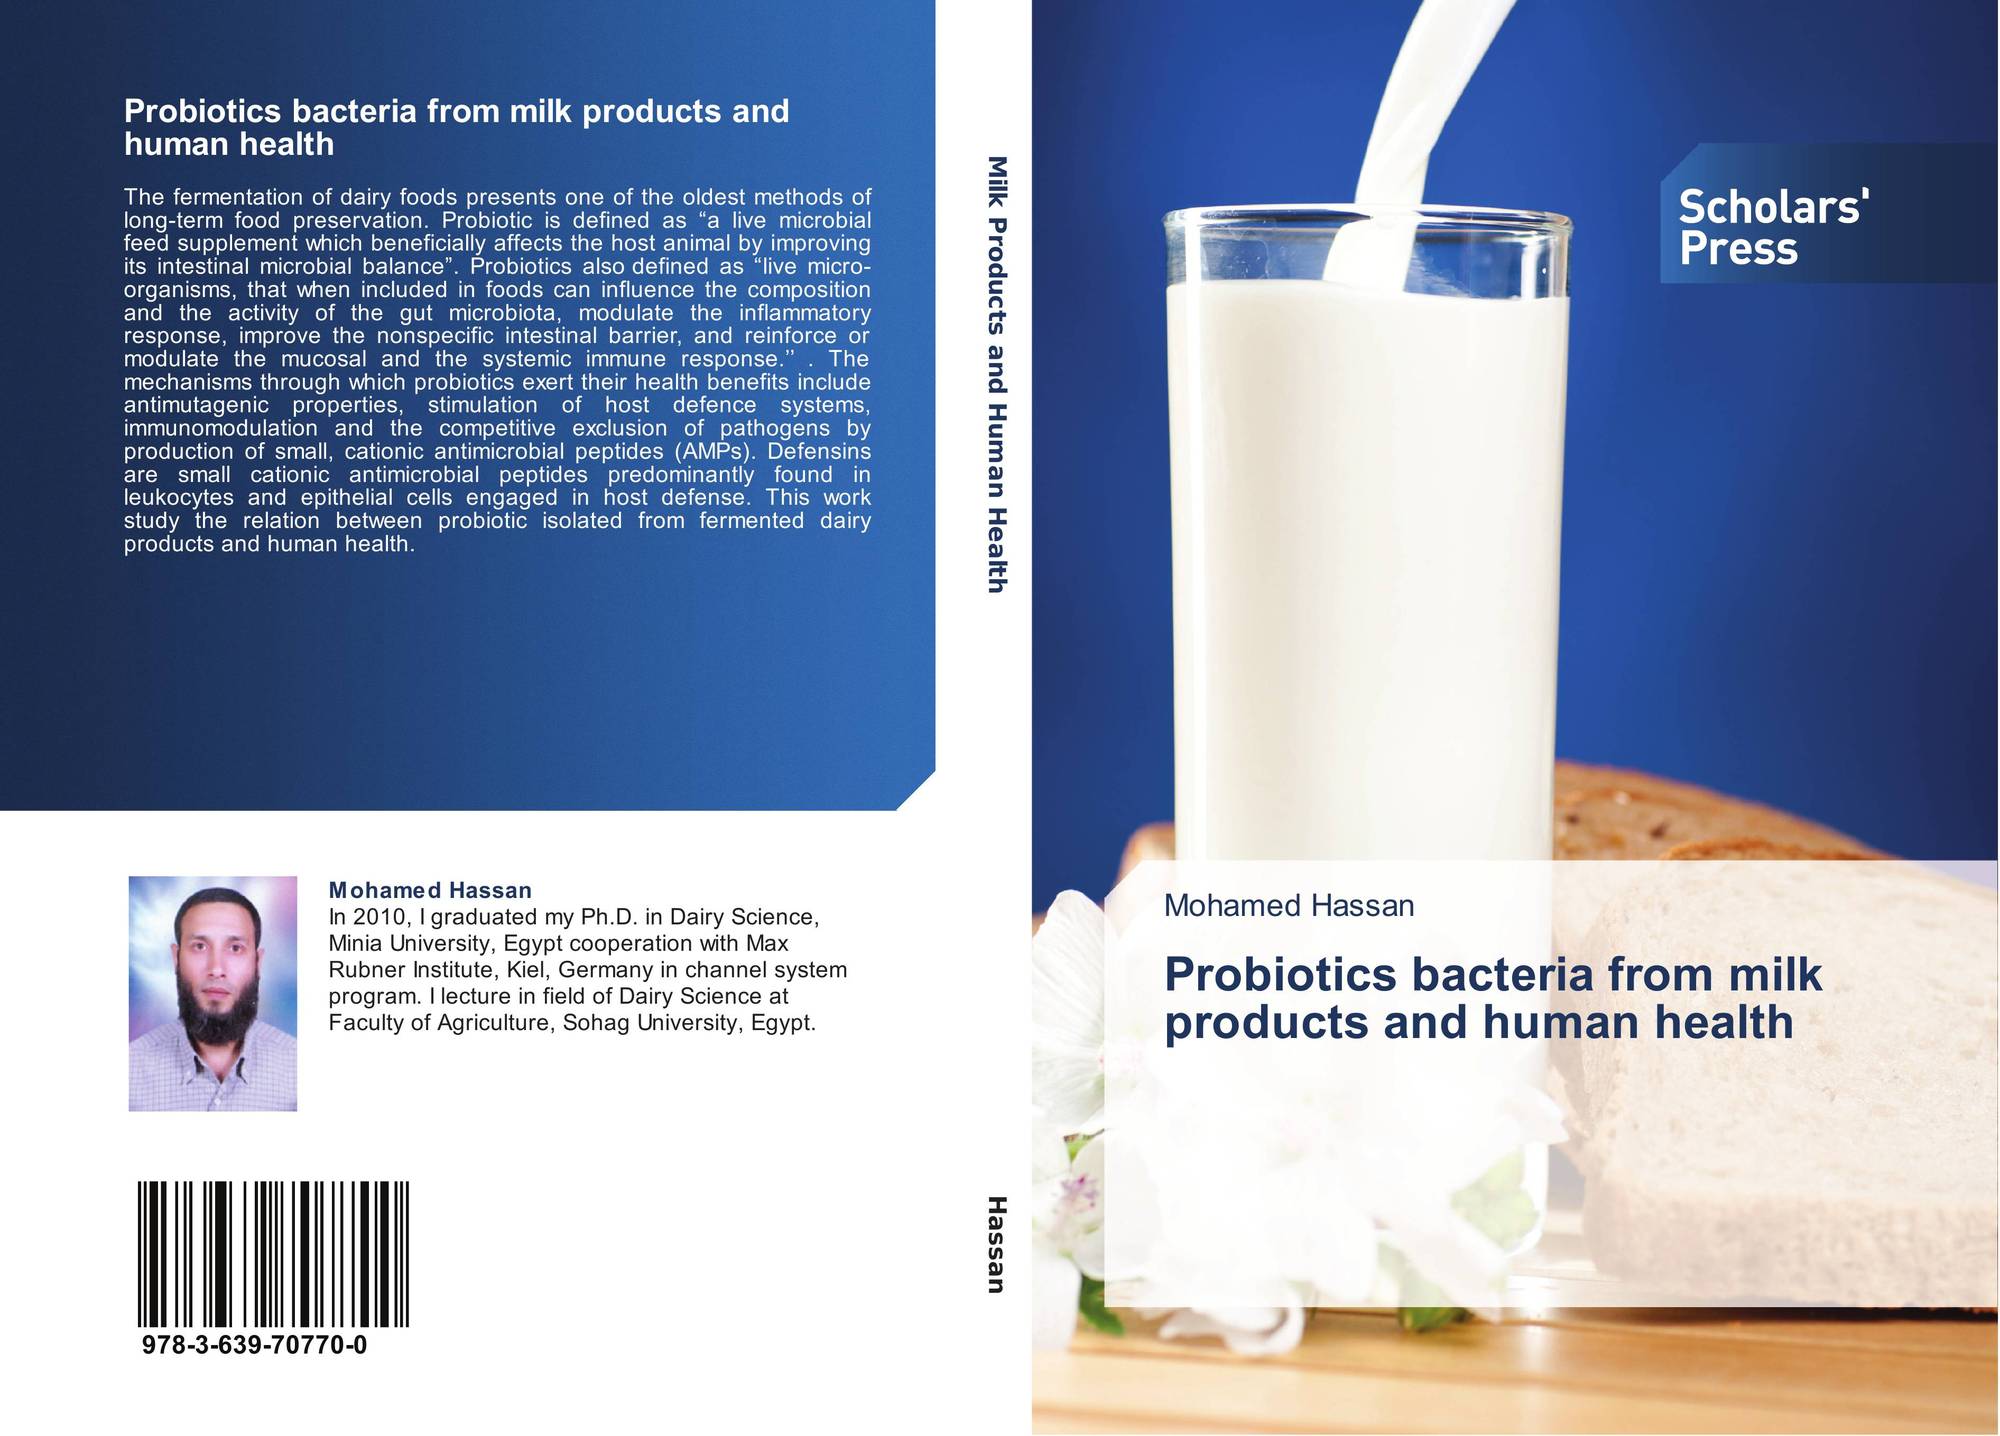 Probiotics bacteria from milk products and human health